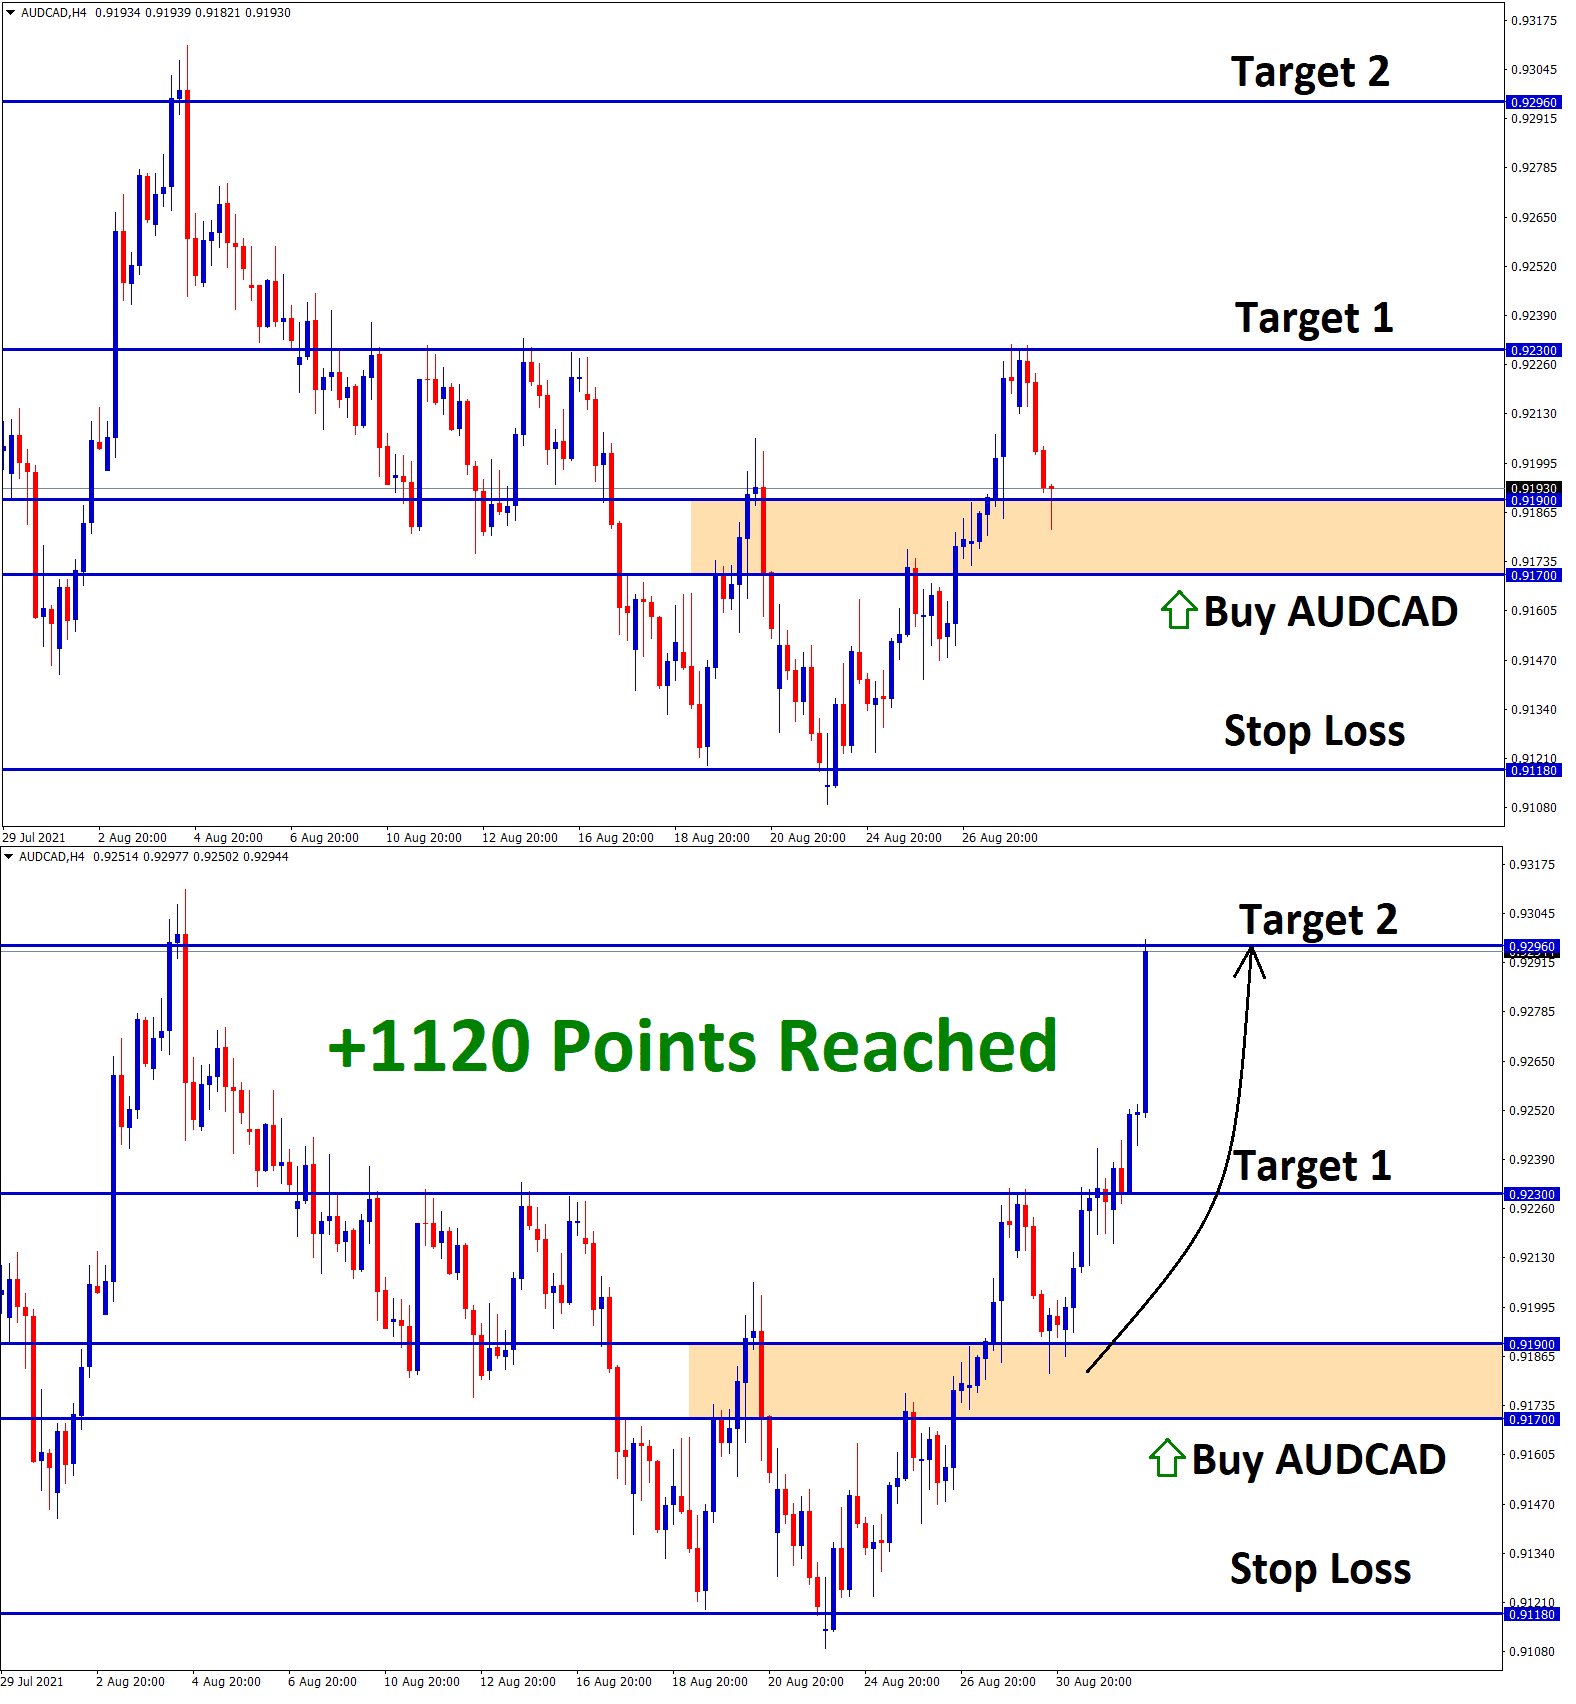 1120 Points Reached in AUDCAD Aug30 T1 Sep01